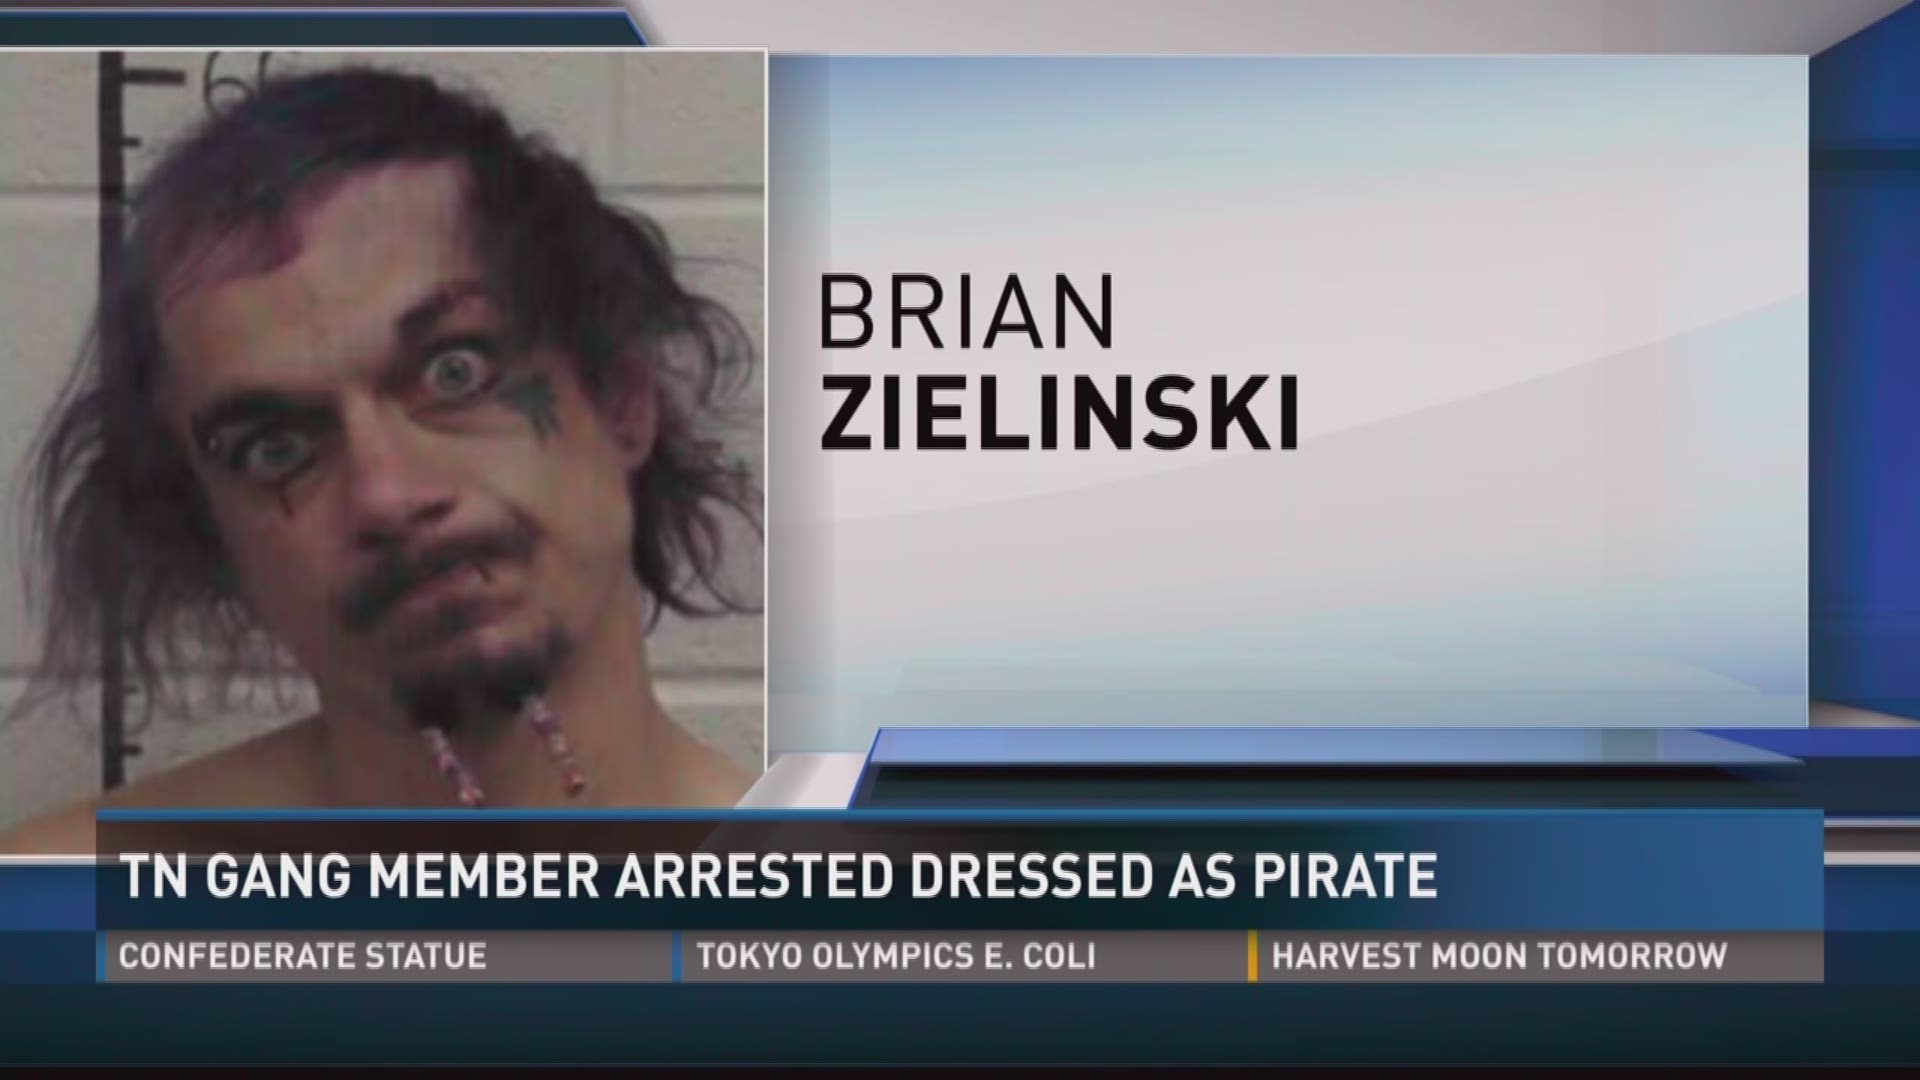 Brian Francis Zielinski, a Hells Angel motorcycle gang member, was dressed in complete pirate regalia when he was arrested for burglary and resisting arrest this weekend in Dunlap.